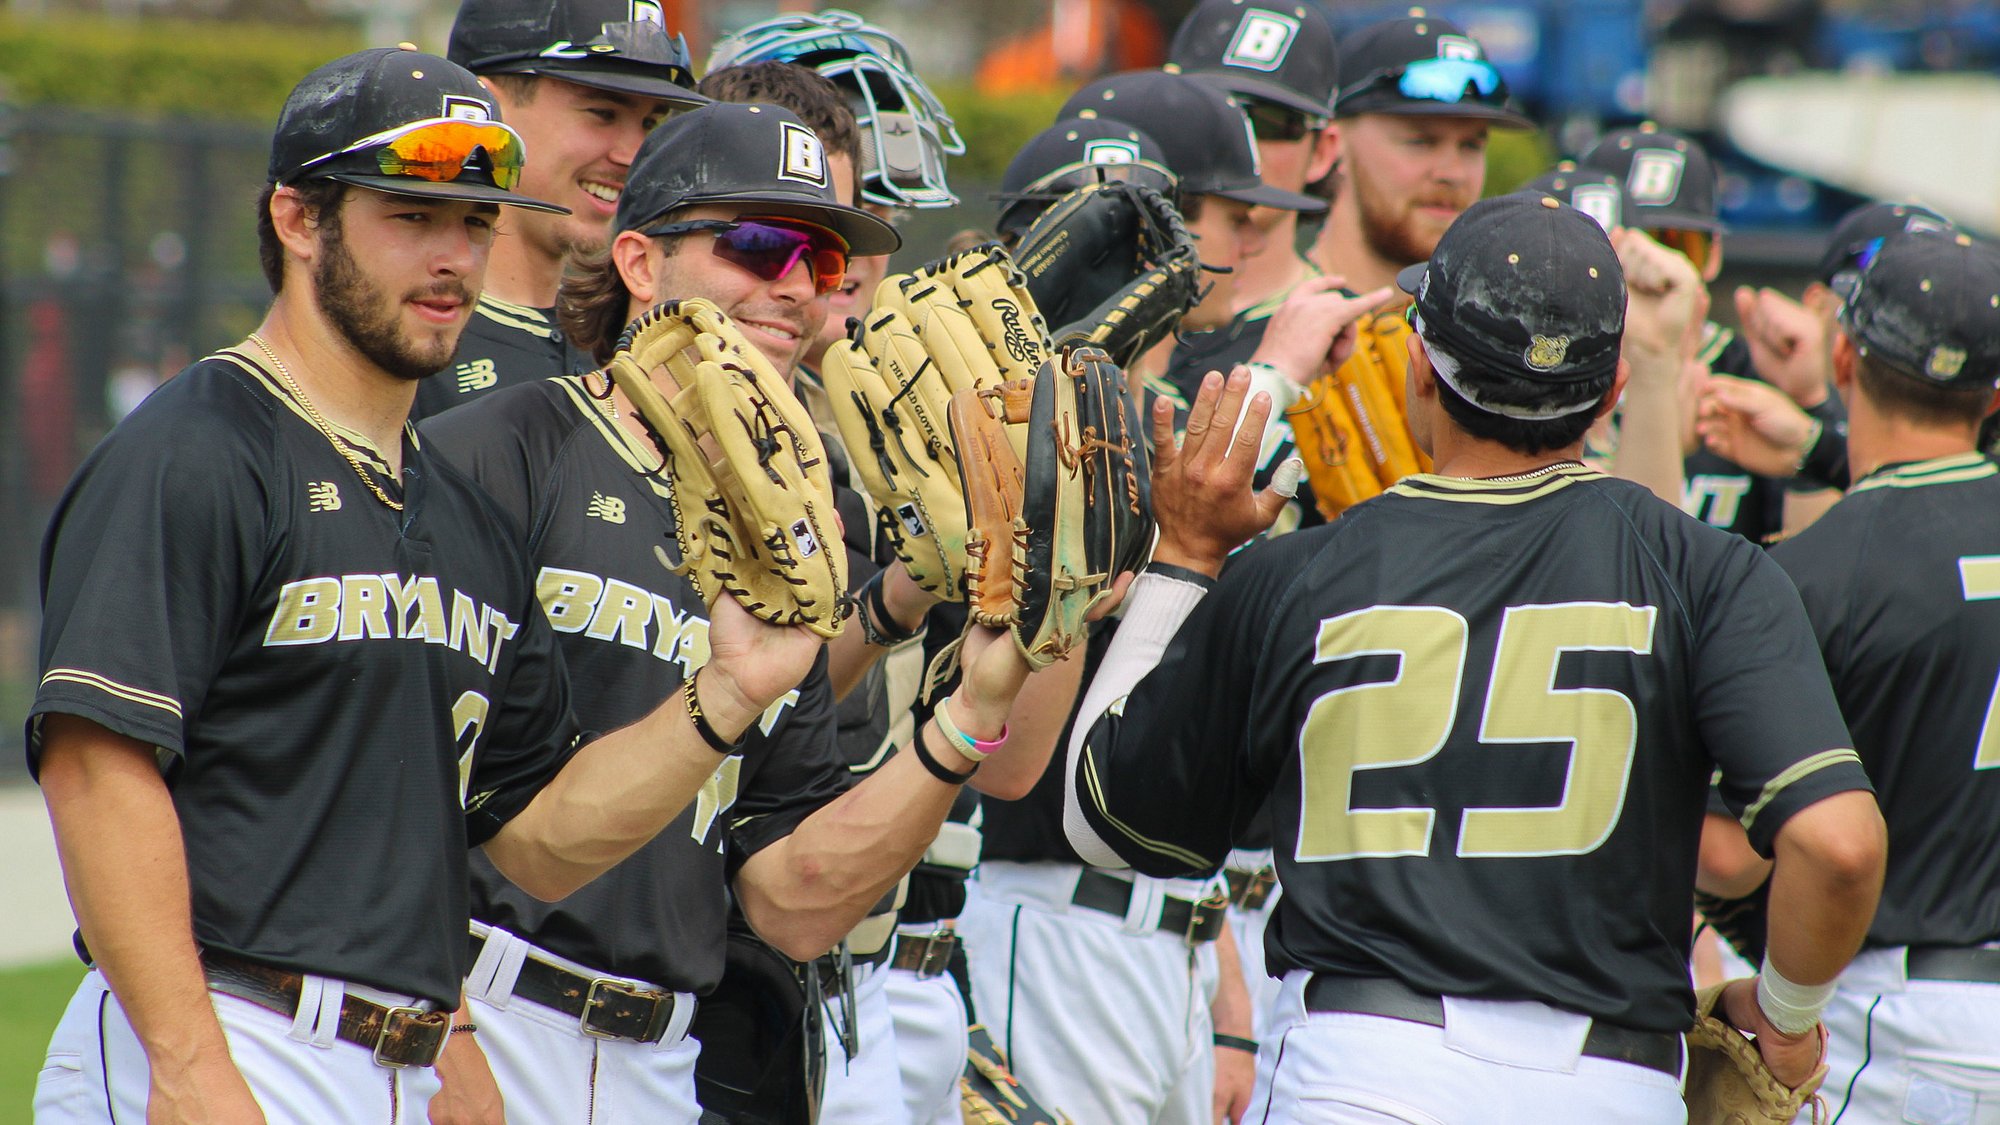 Bryant hosts UAlbany this weekend at Conaty Park